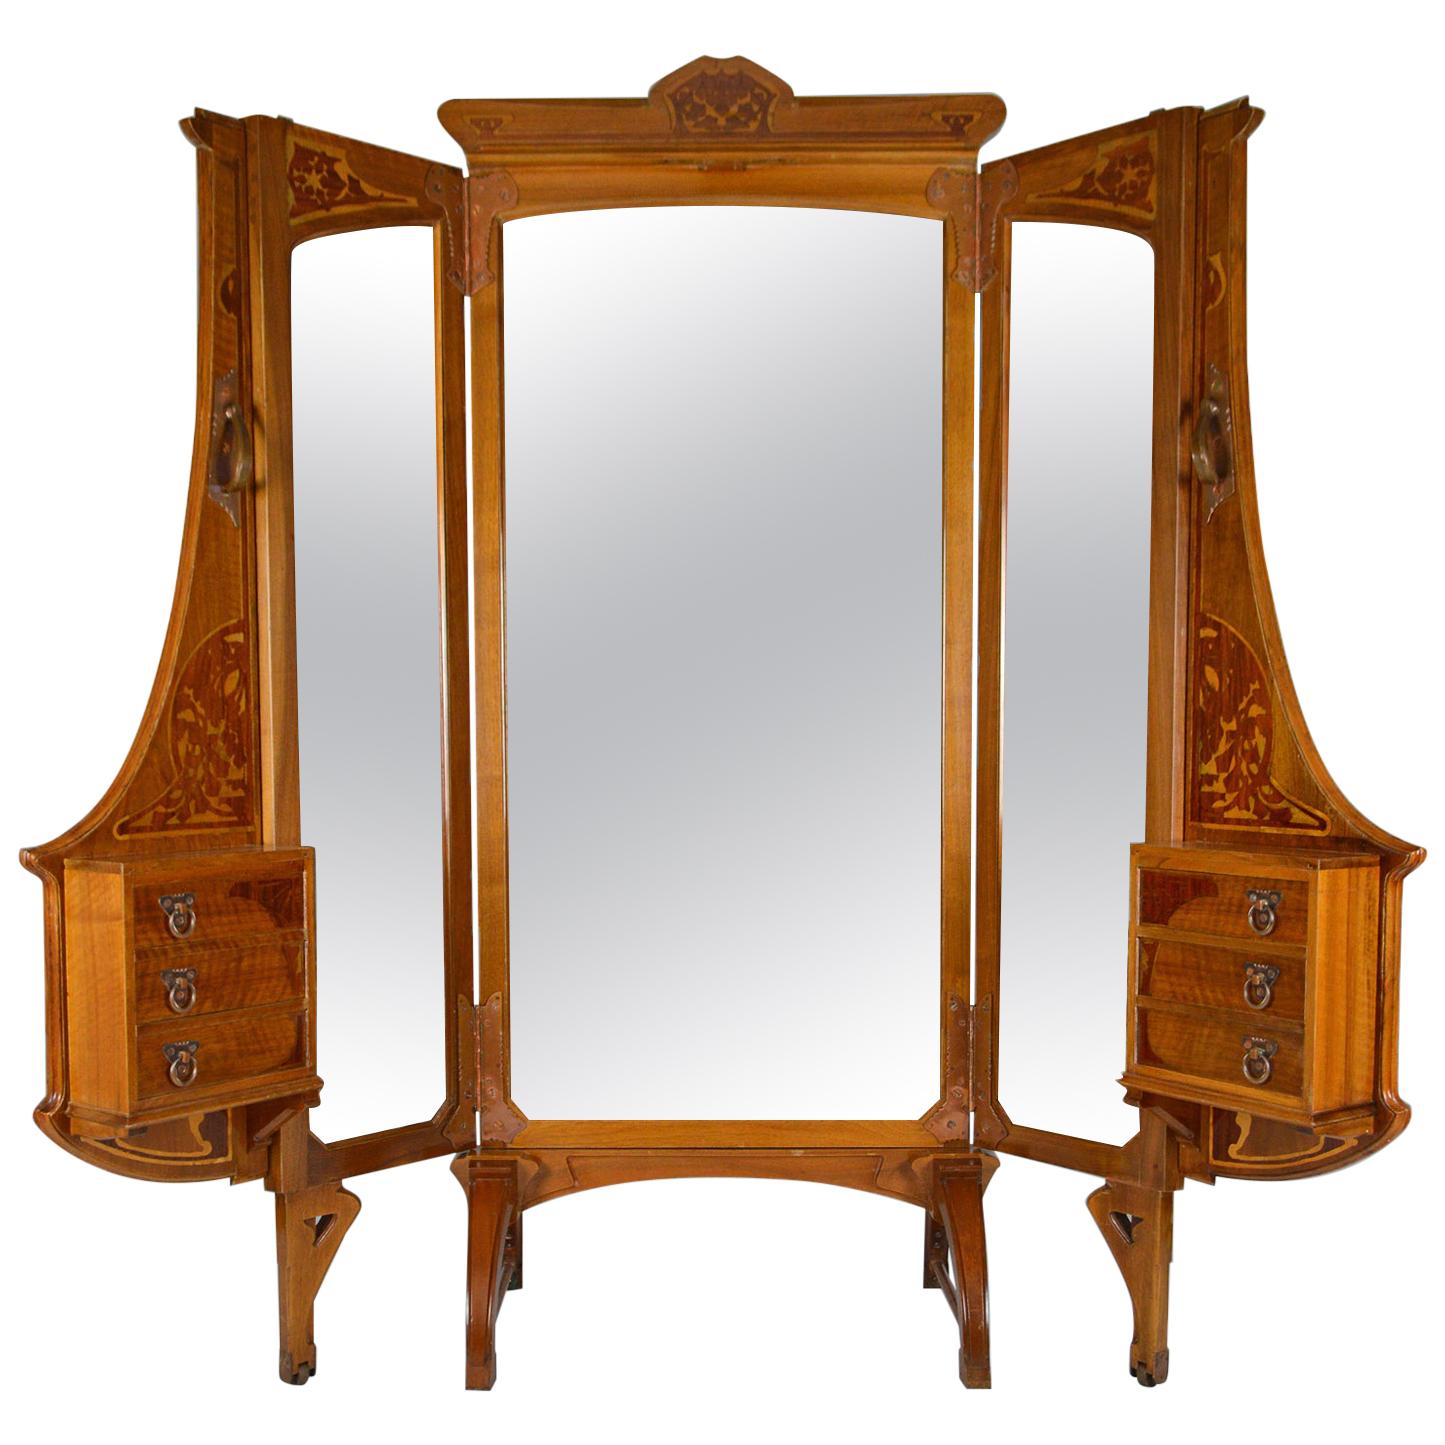 French Art Nouveau Cheval Mirror 5-Panel Screen / Vanity Dressing Table, 1901 For Sale